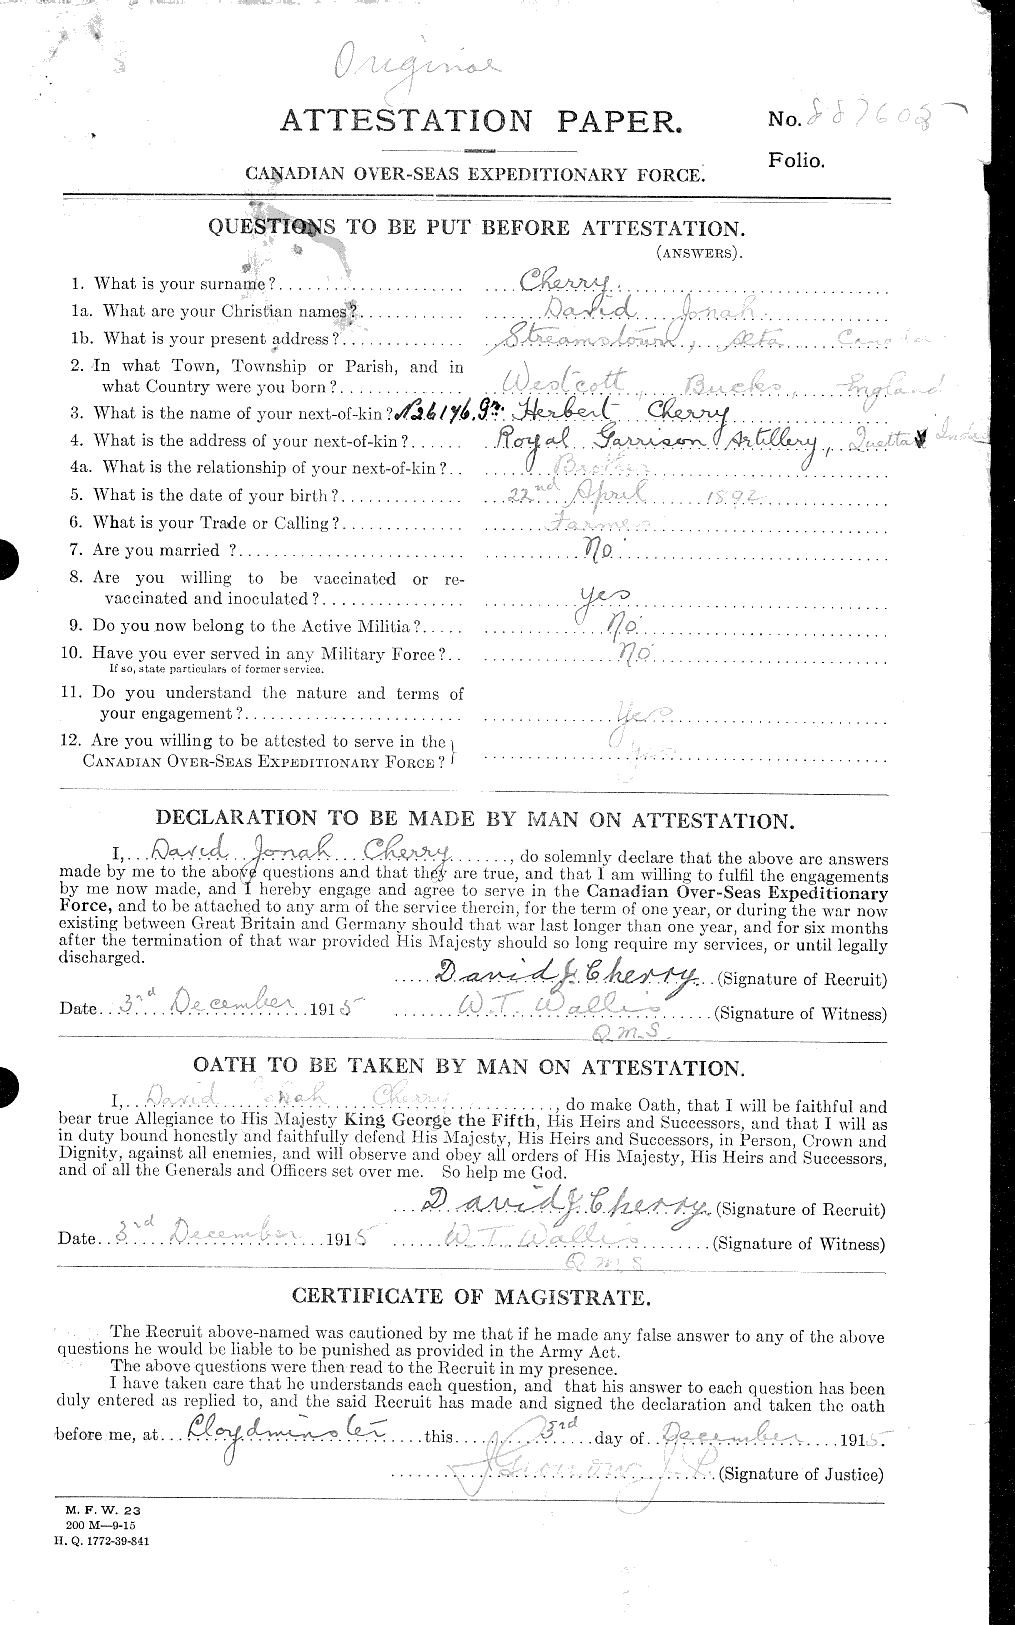 Personnel Records of the First World War - CEF 017532a